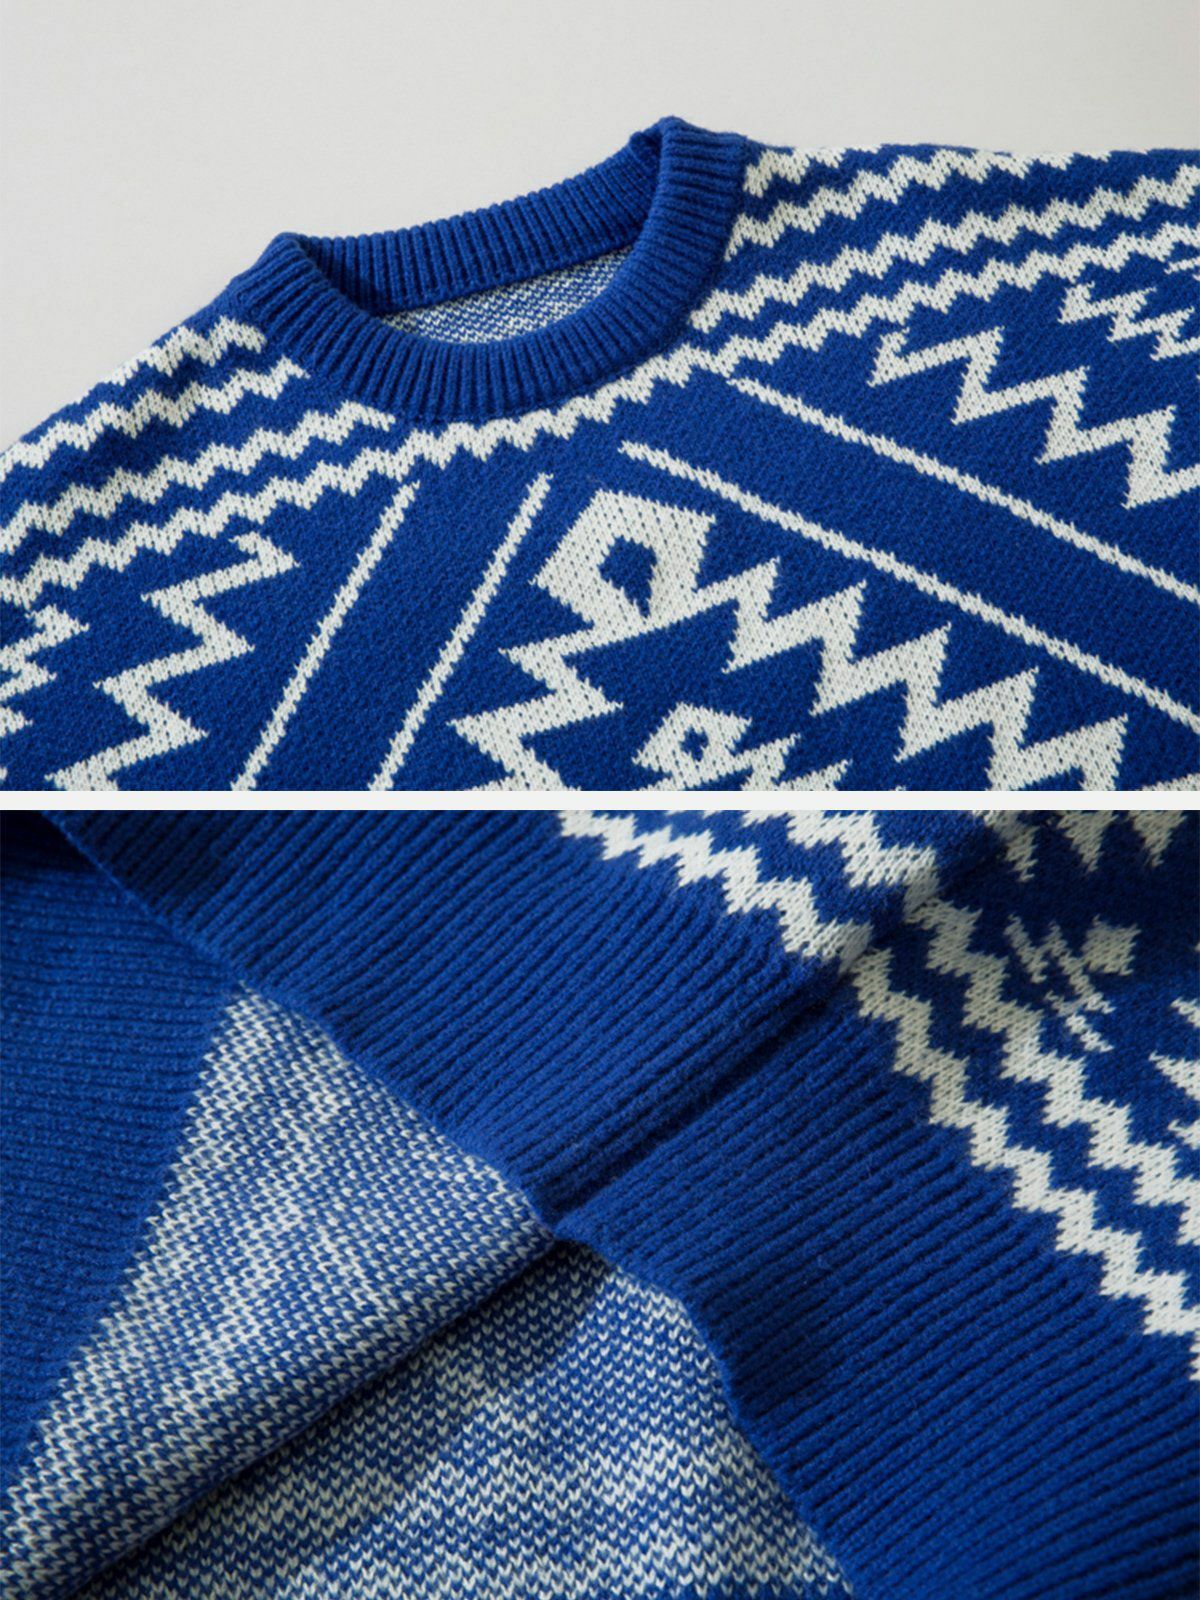 totem print graphic sweater edgy y2k streetwear 5609